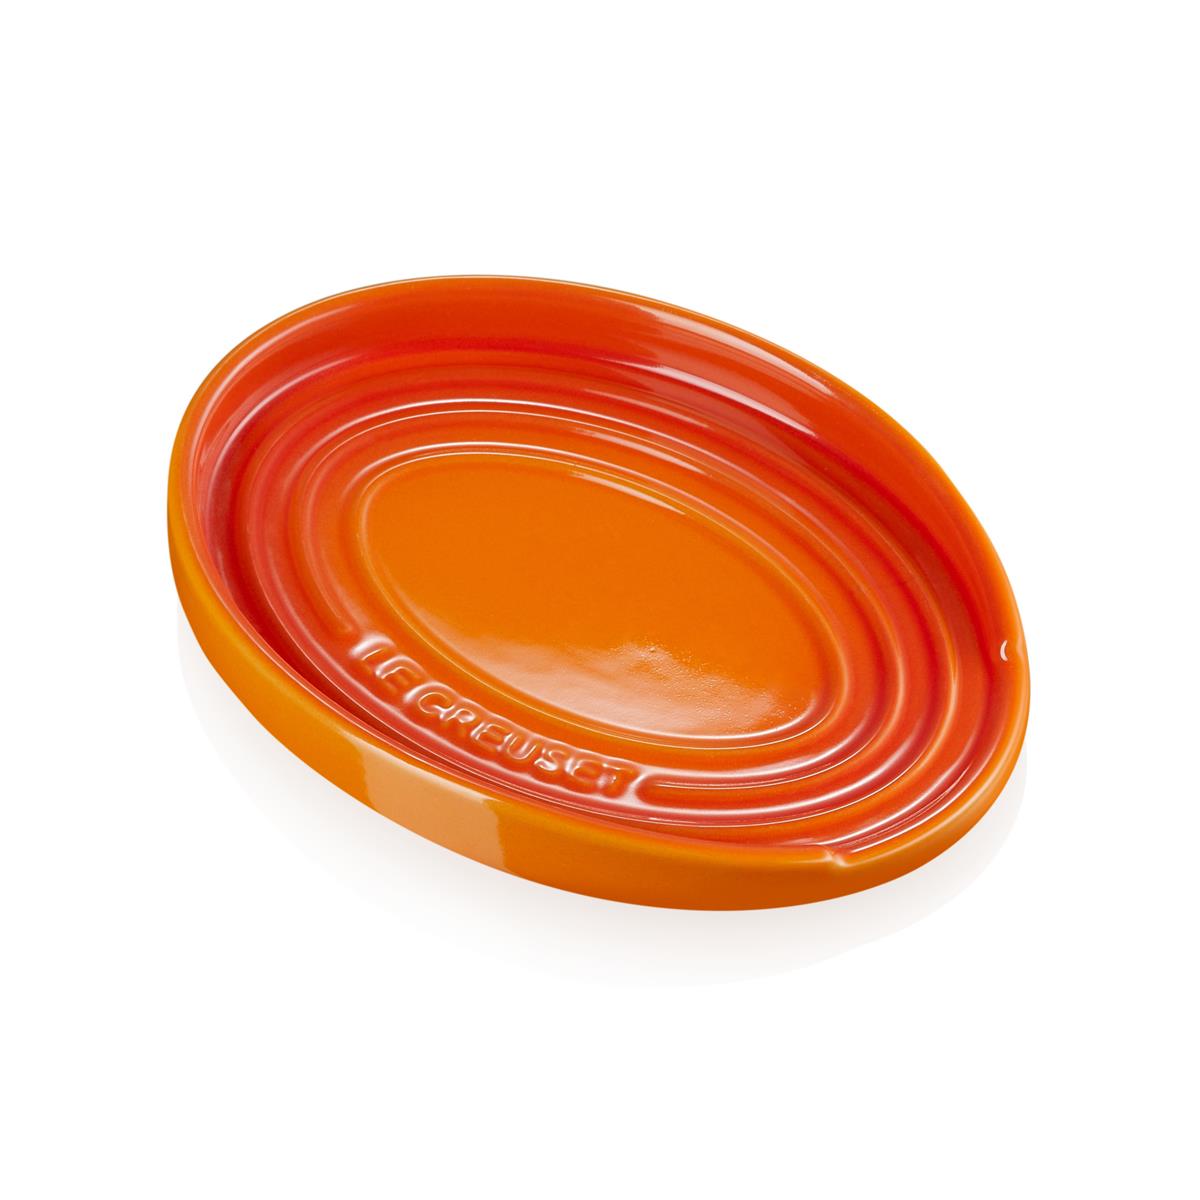 Where is the ideal spot for the le creuset spoon rest?